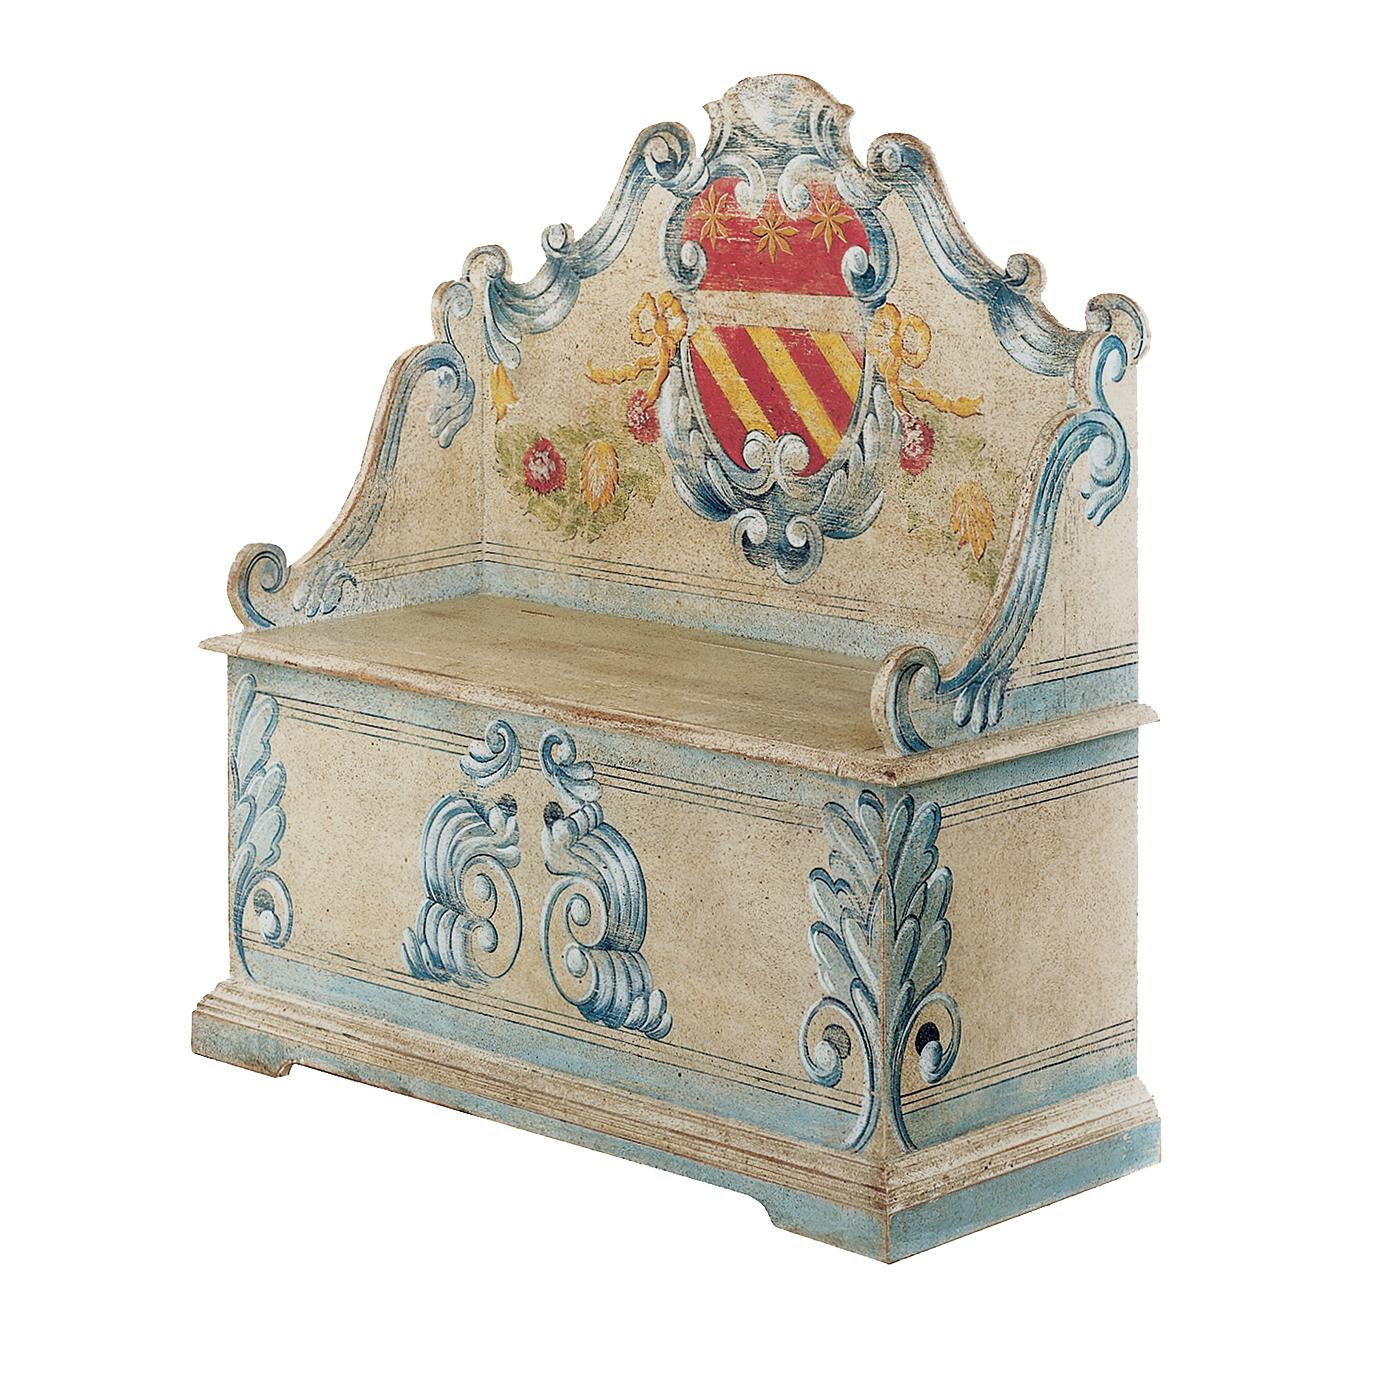 An objet d'art that will enrich the look of a classically or traditionally decorated home, this piece will be an invaluable addition to an entryway, living room, or bedroom. Crafted of solid wood and equipped with a flap for storage under the seat,